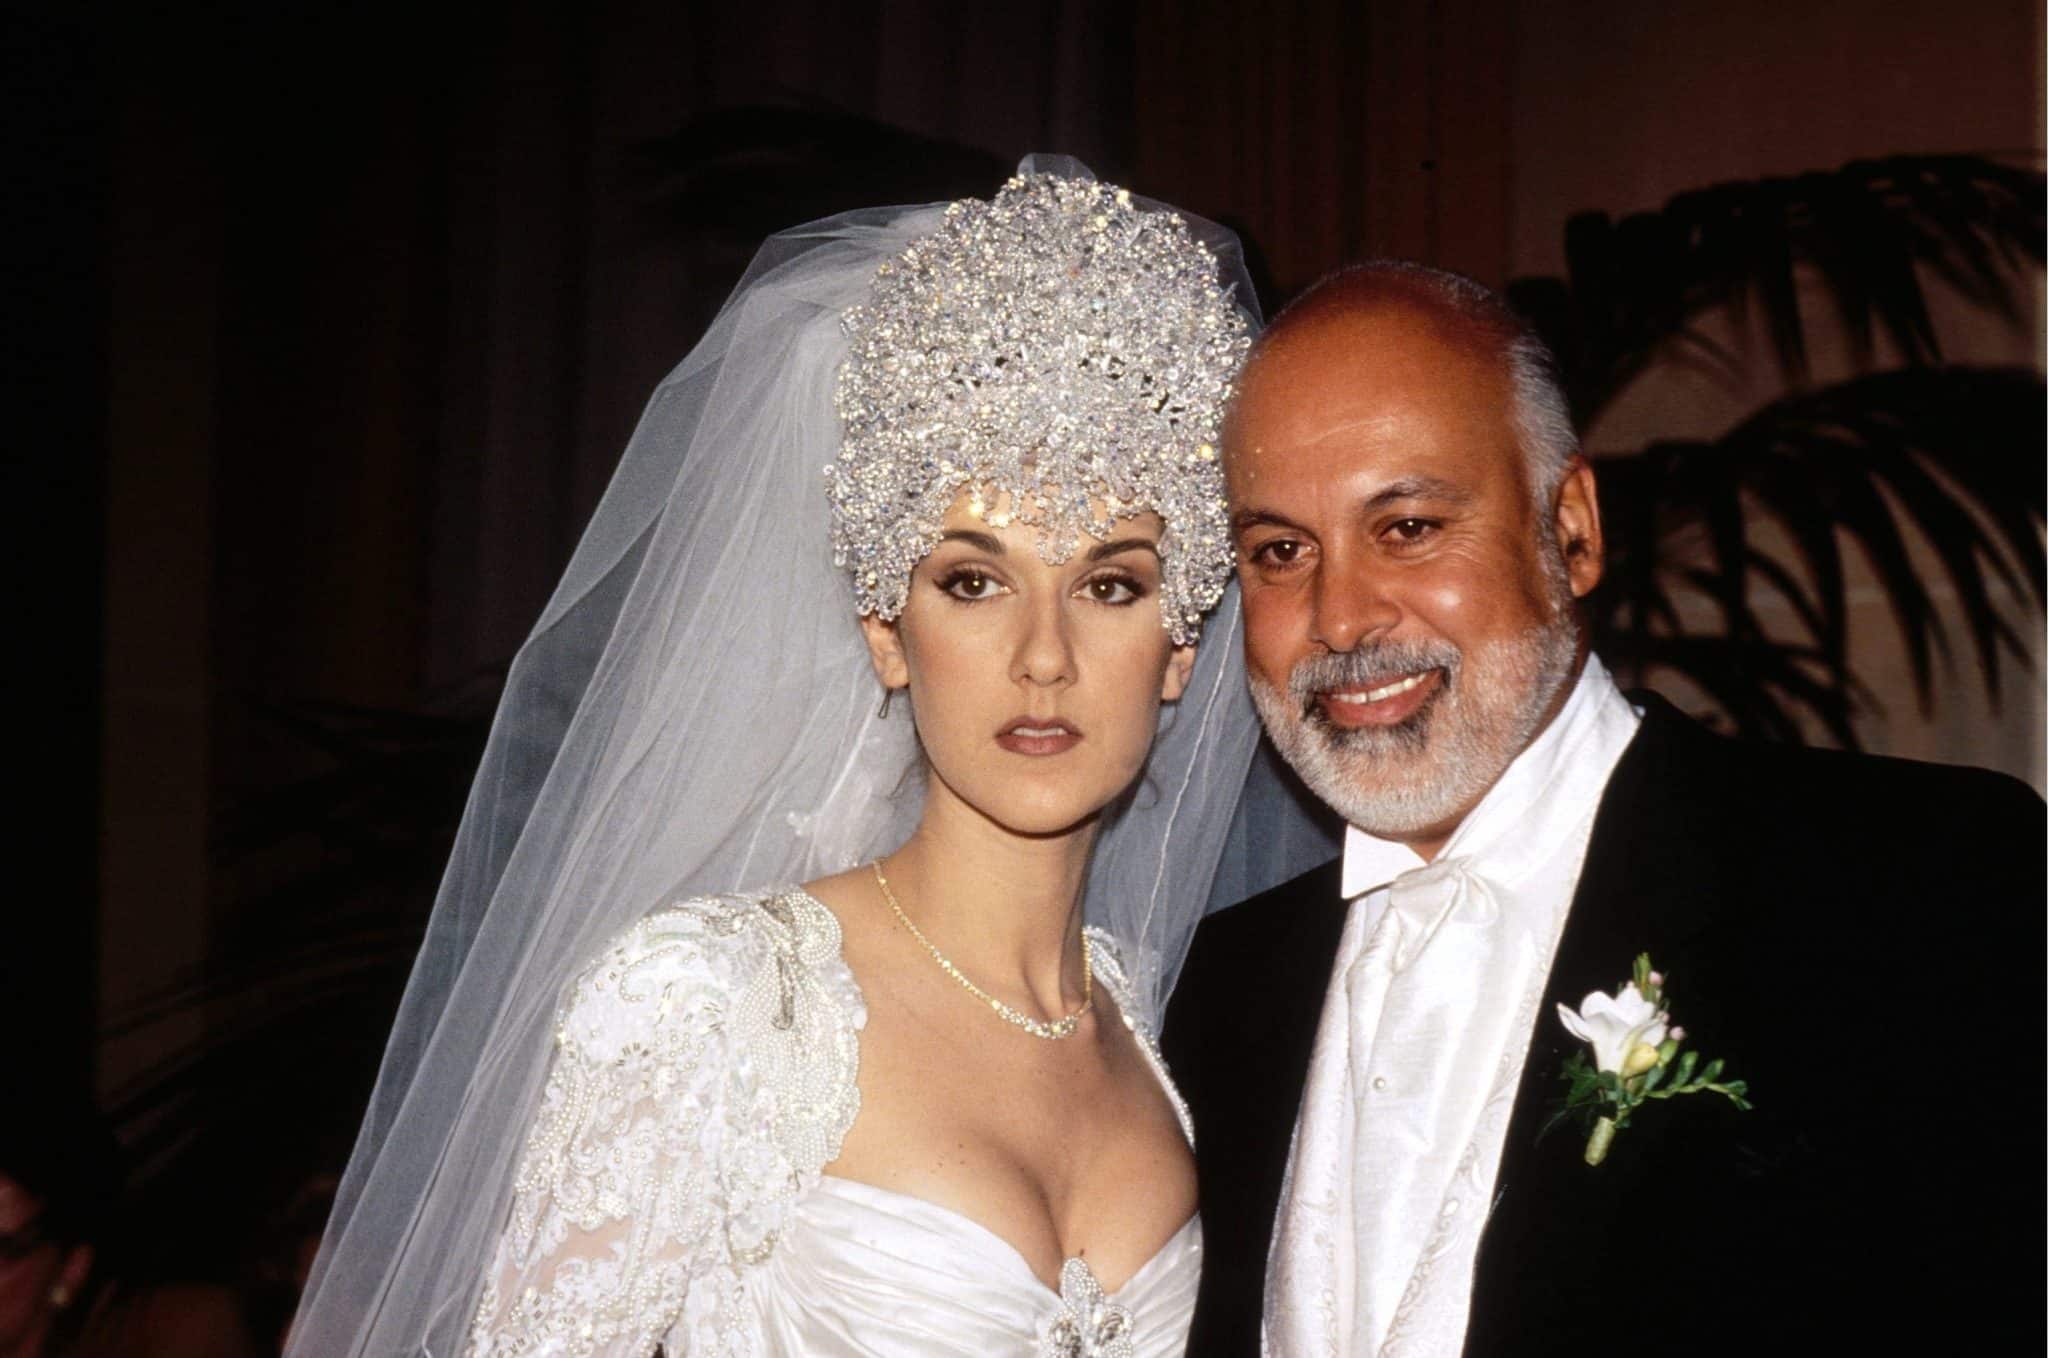 CANADA - MAY 01: Archives: Celine Dion In Montreal, Canada In May, 1996-December, 17, 1994, during her wedding with Rene Angelil. (Photo by Michel PONOMAREFF/PONOPRESSE/Gamma-Rapho via Getty Images)